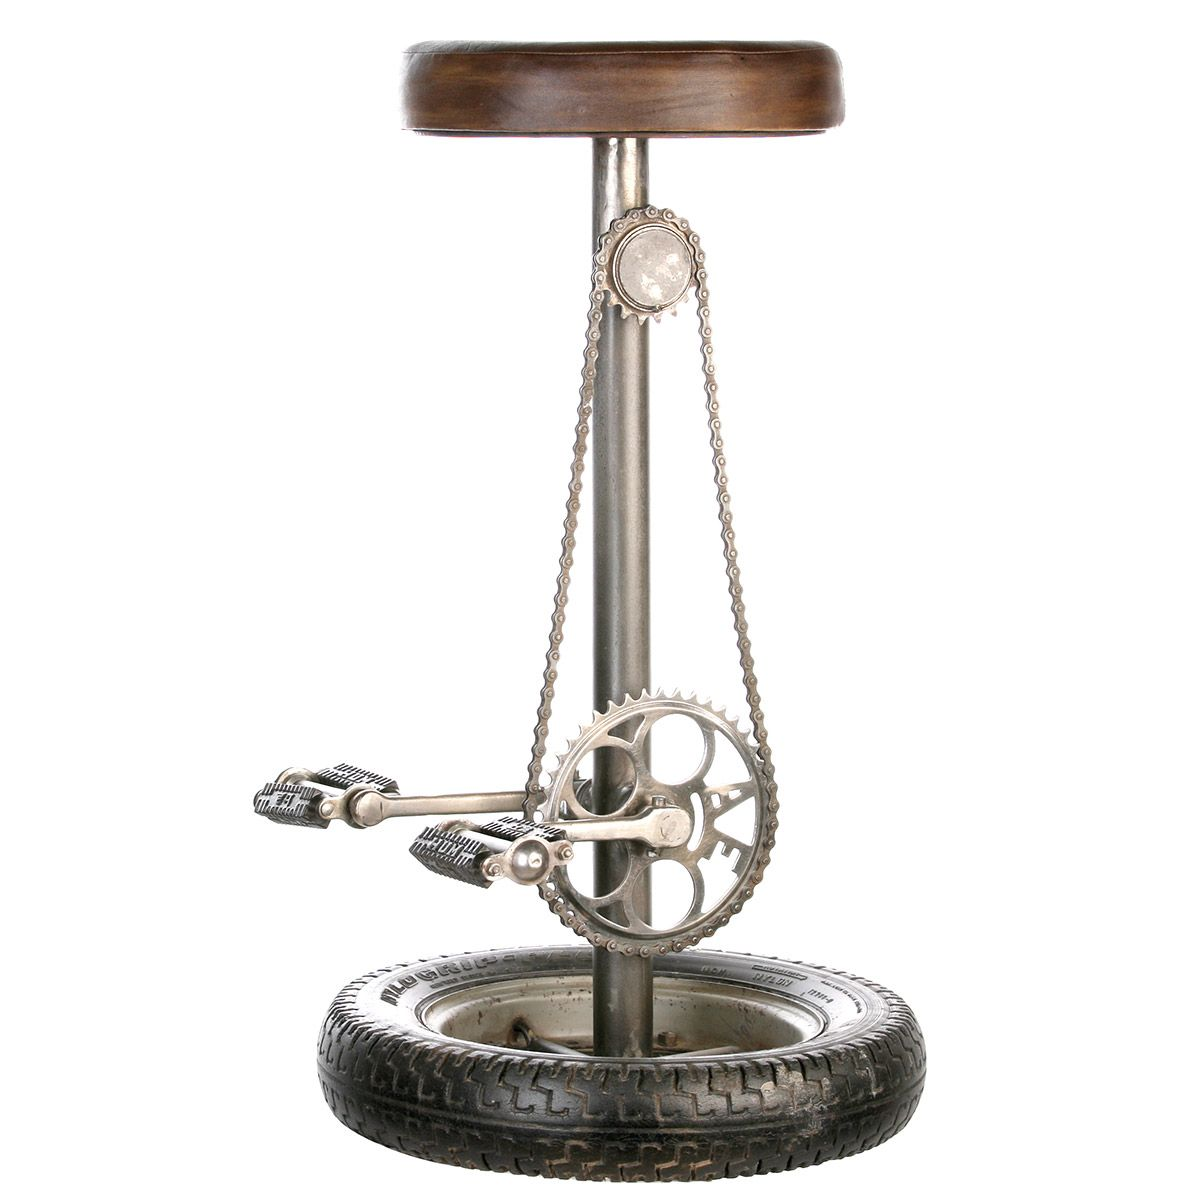 Recycled Wheel and Metal Parts Stool